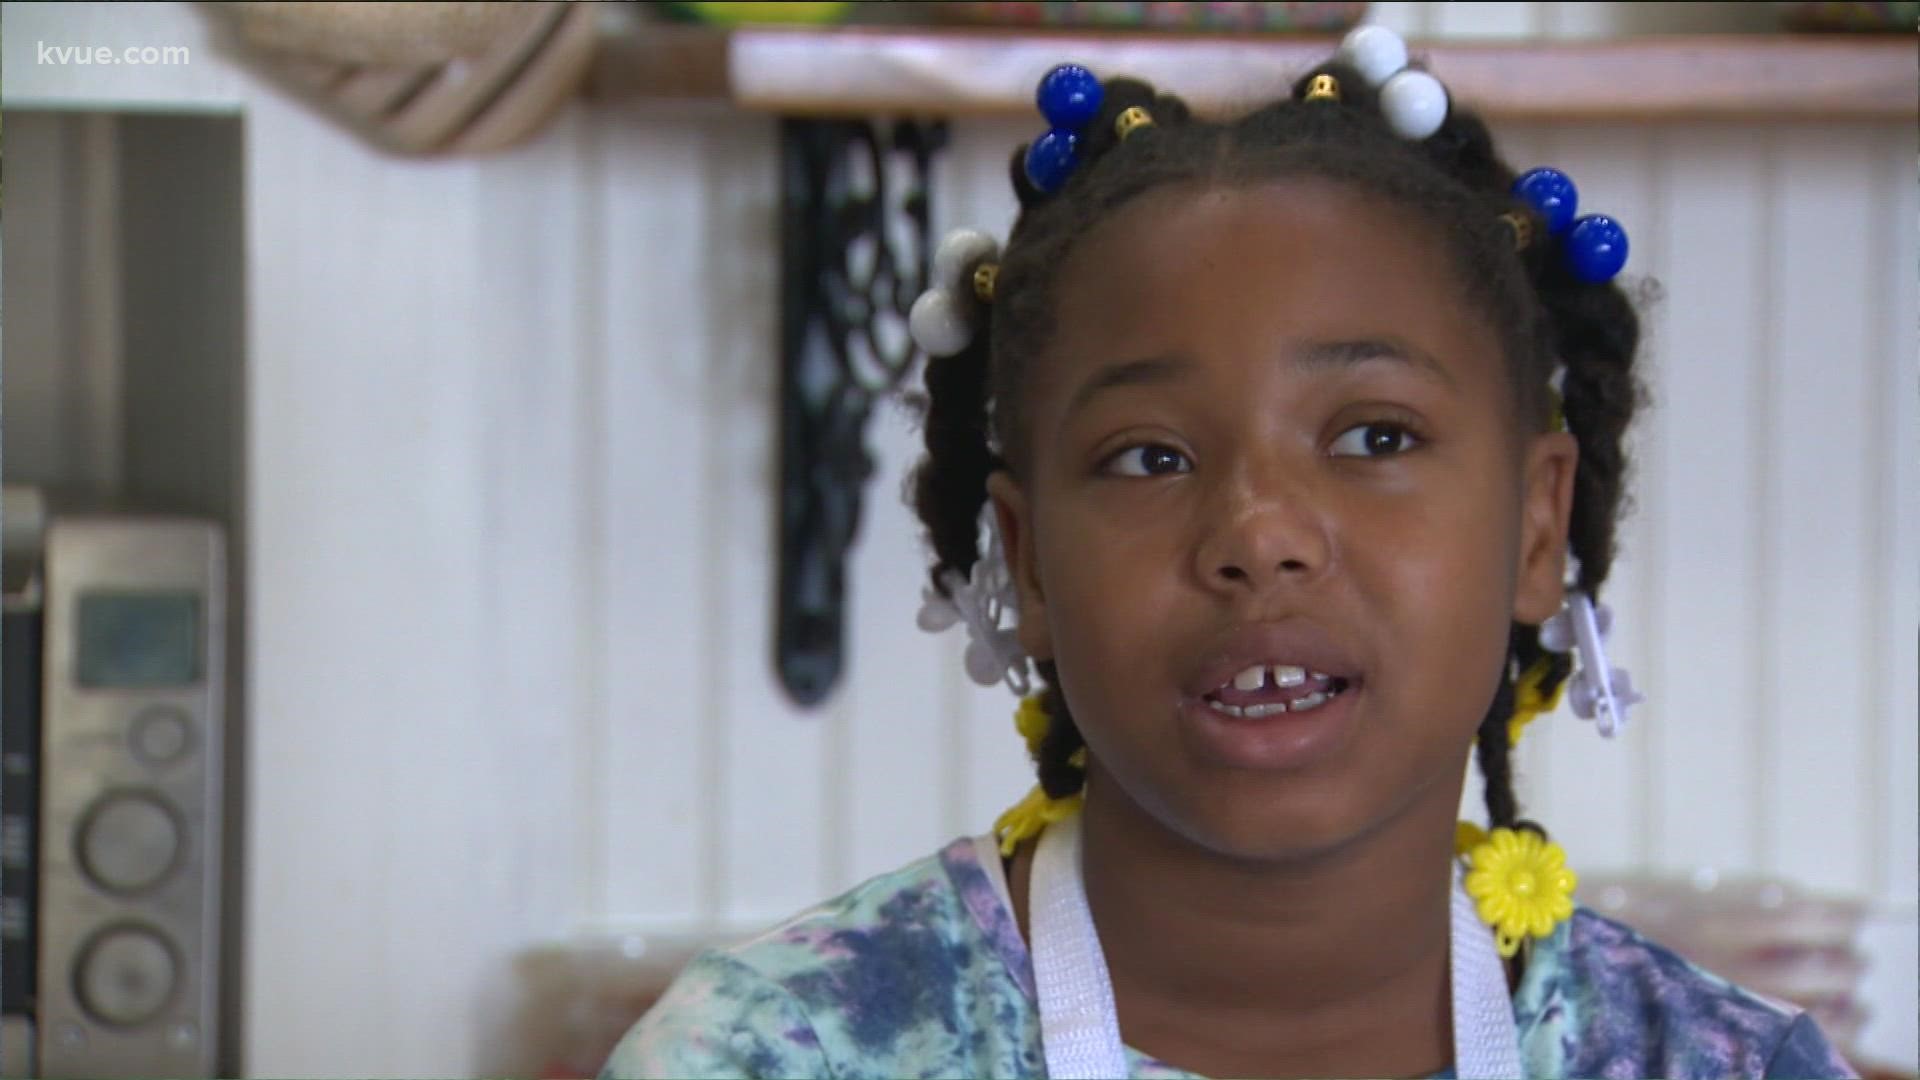 For 8-year-old Kennedy, finding a forever family would be sweeter than icing on a cupcake.